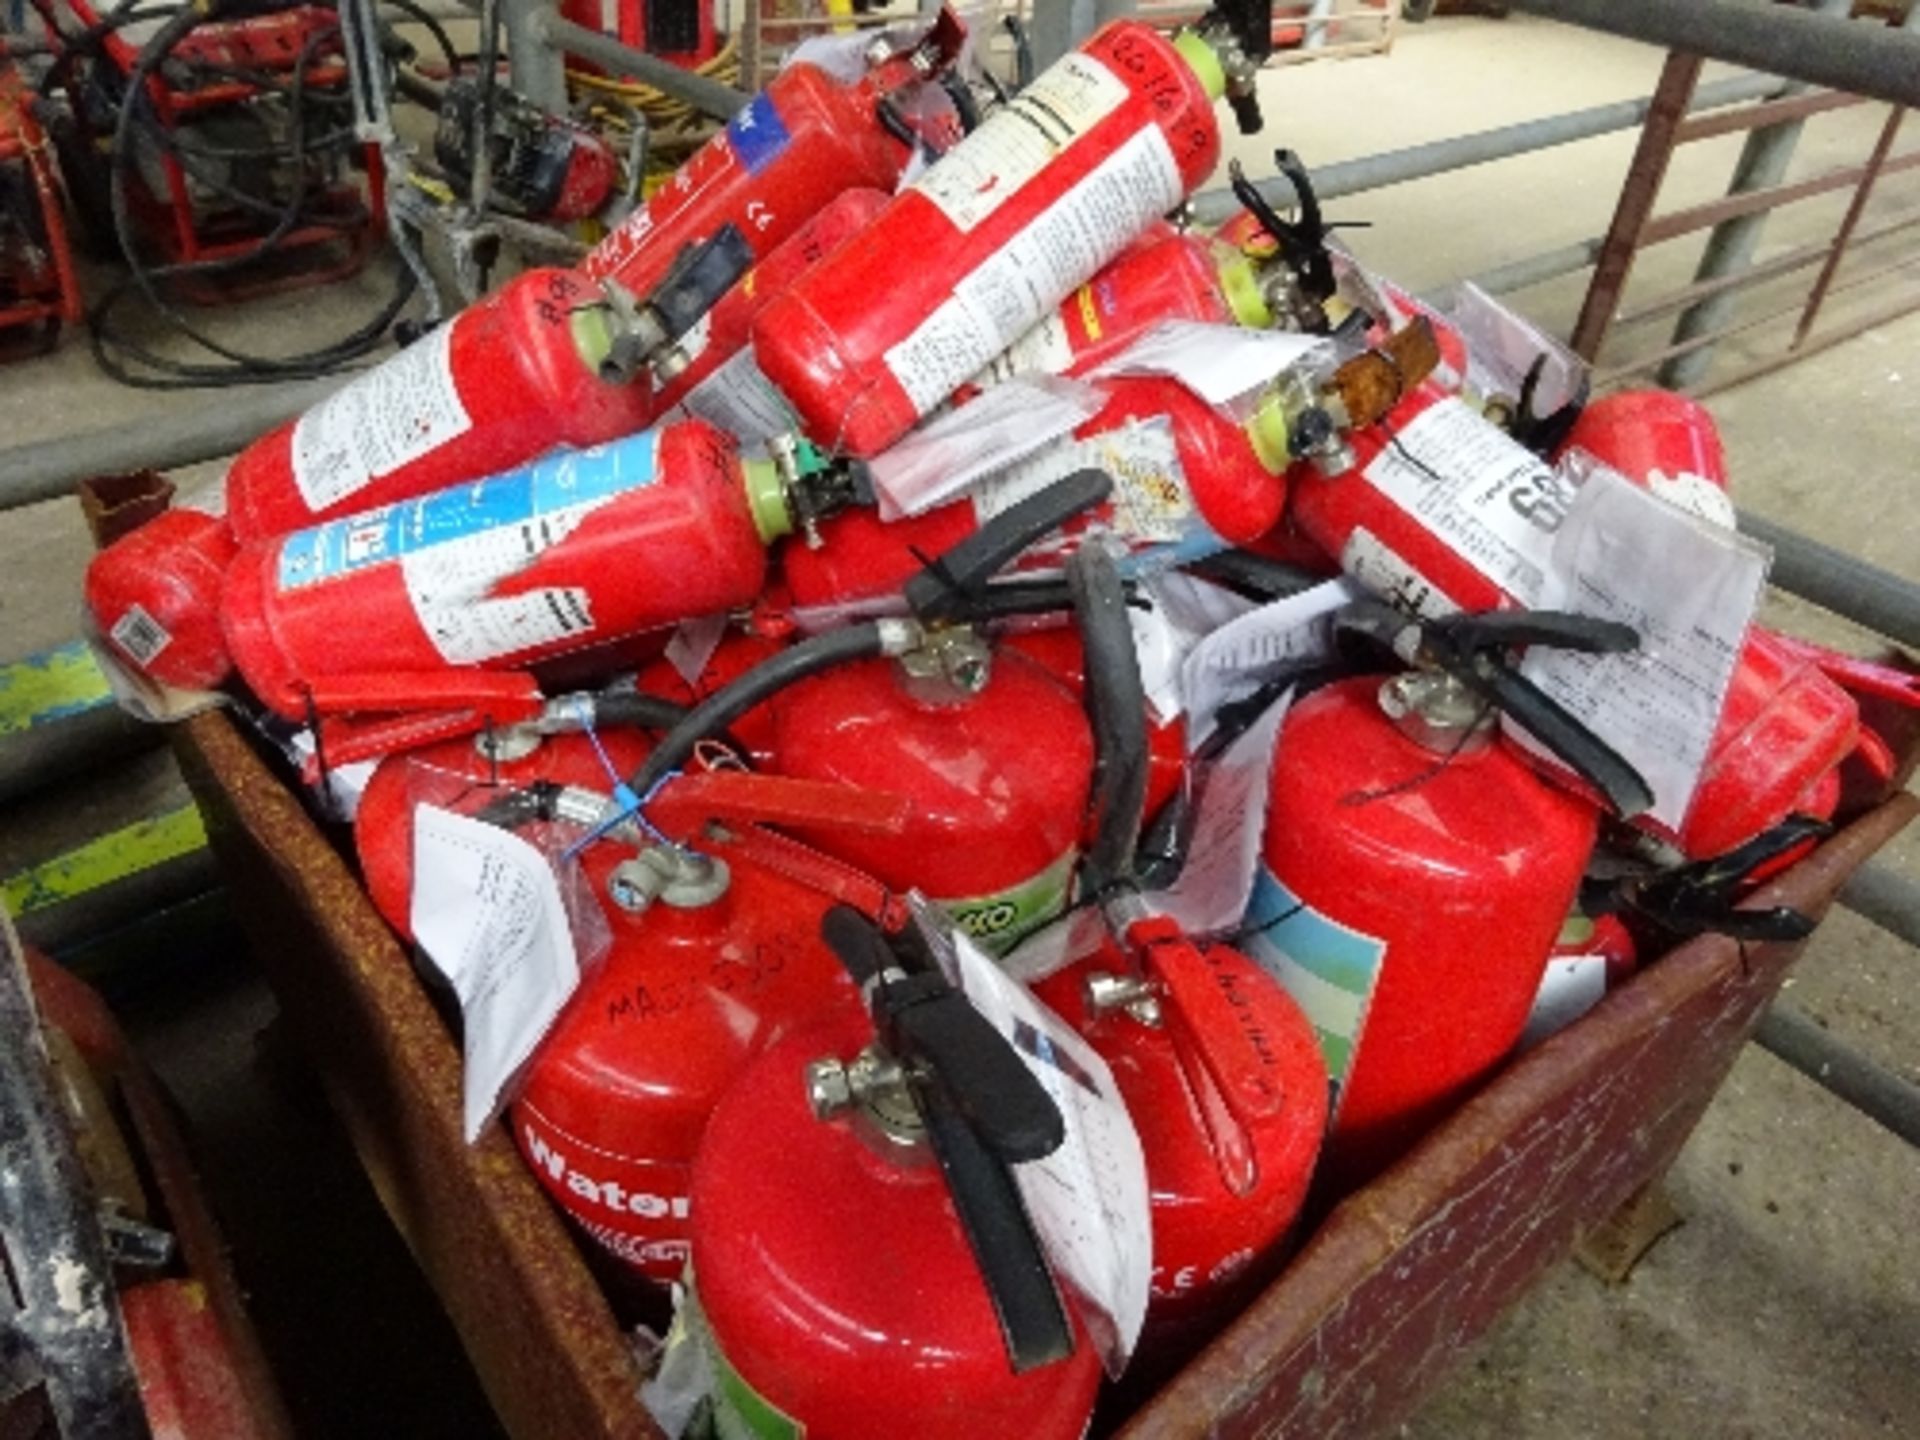 Box of fire extinguishers